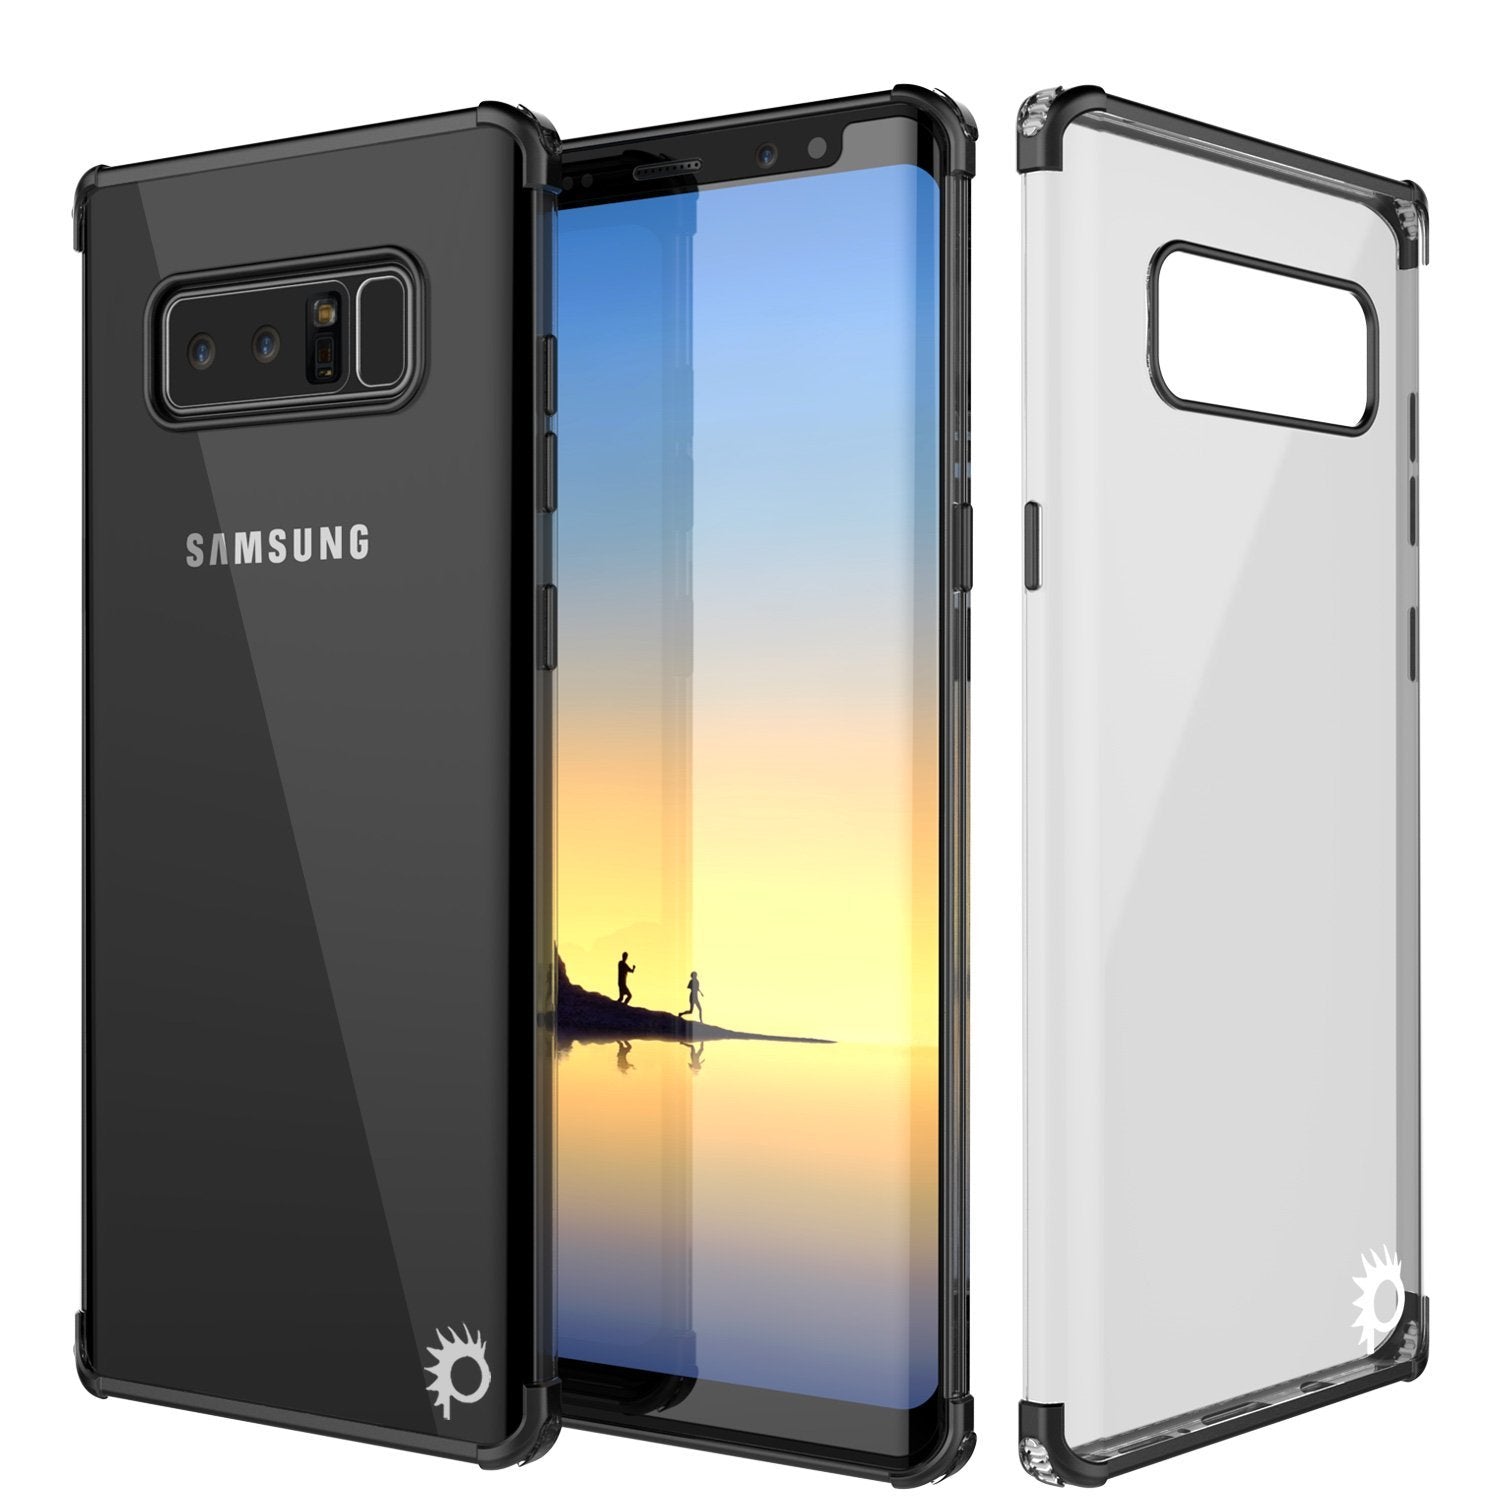 Galaxy Note 8 Punkcase Slim-Fit Case W/ Screen Protector Cover [Black]